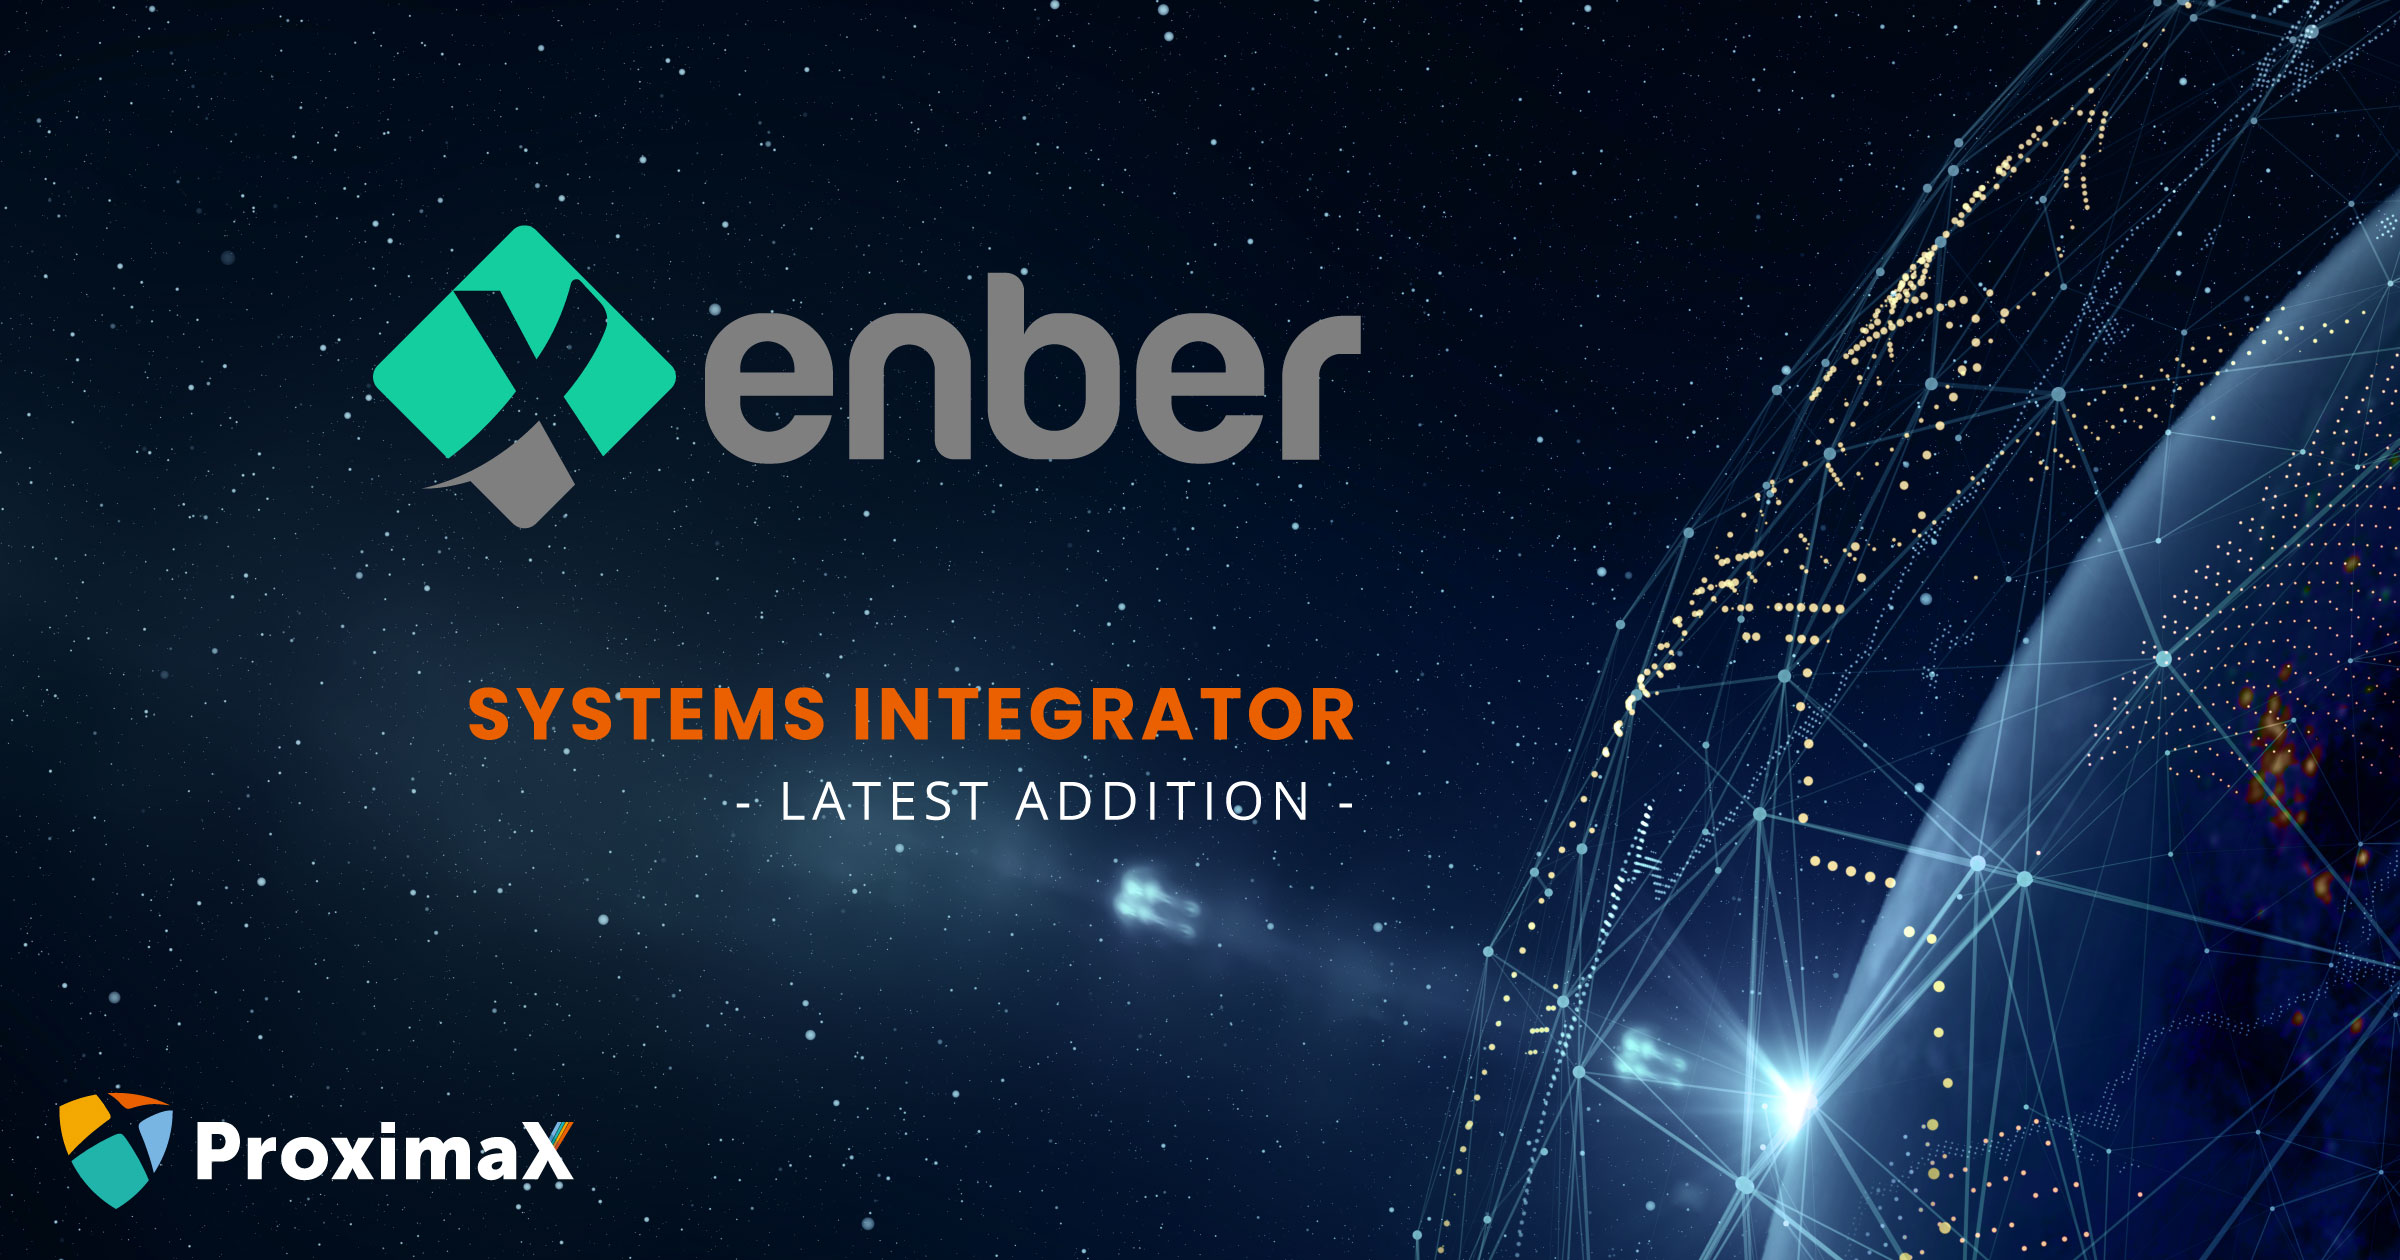 ProximaX Appoints Xenber as Systems Integrator